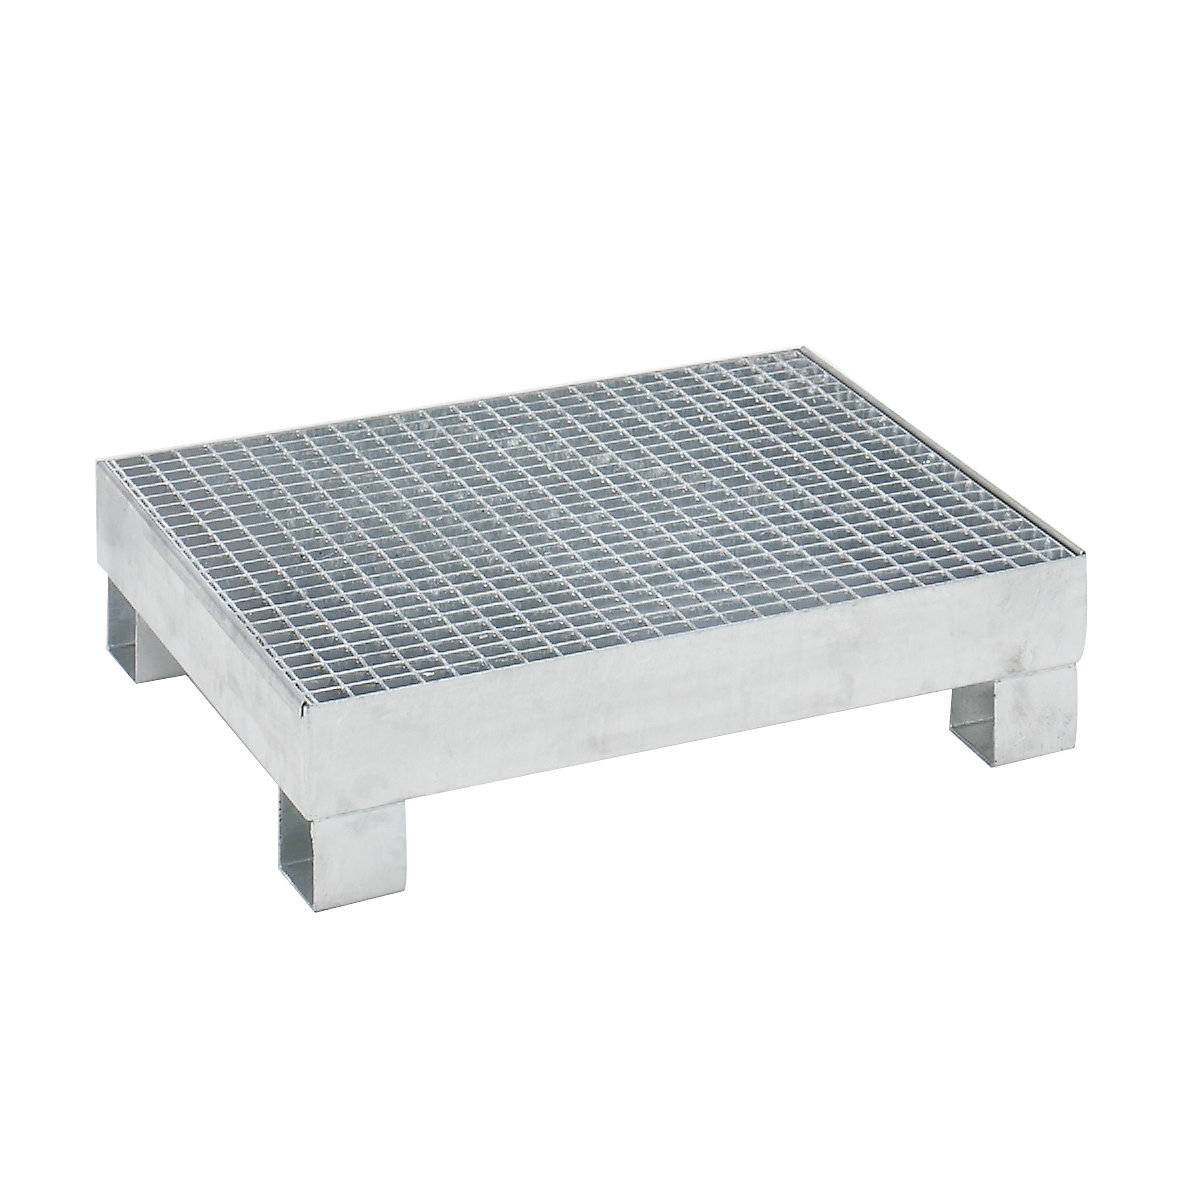 Sump tray for 60 l – eurokraft basic, LxWxH 800 x 900 x 220 mm, with certification, hot dip galvanised, with grate-6